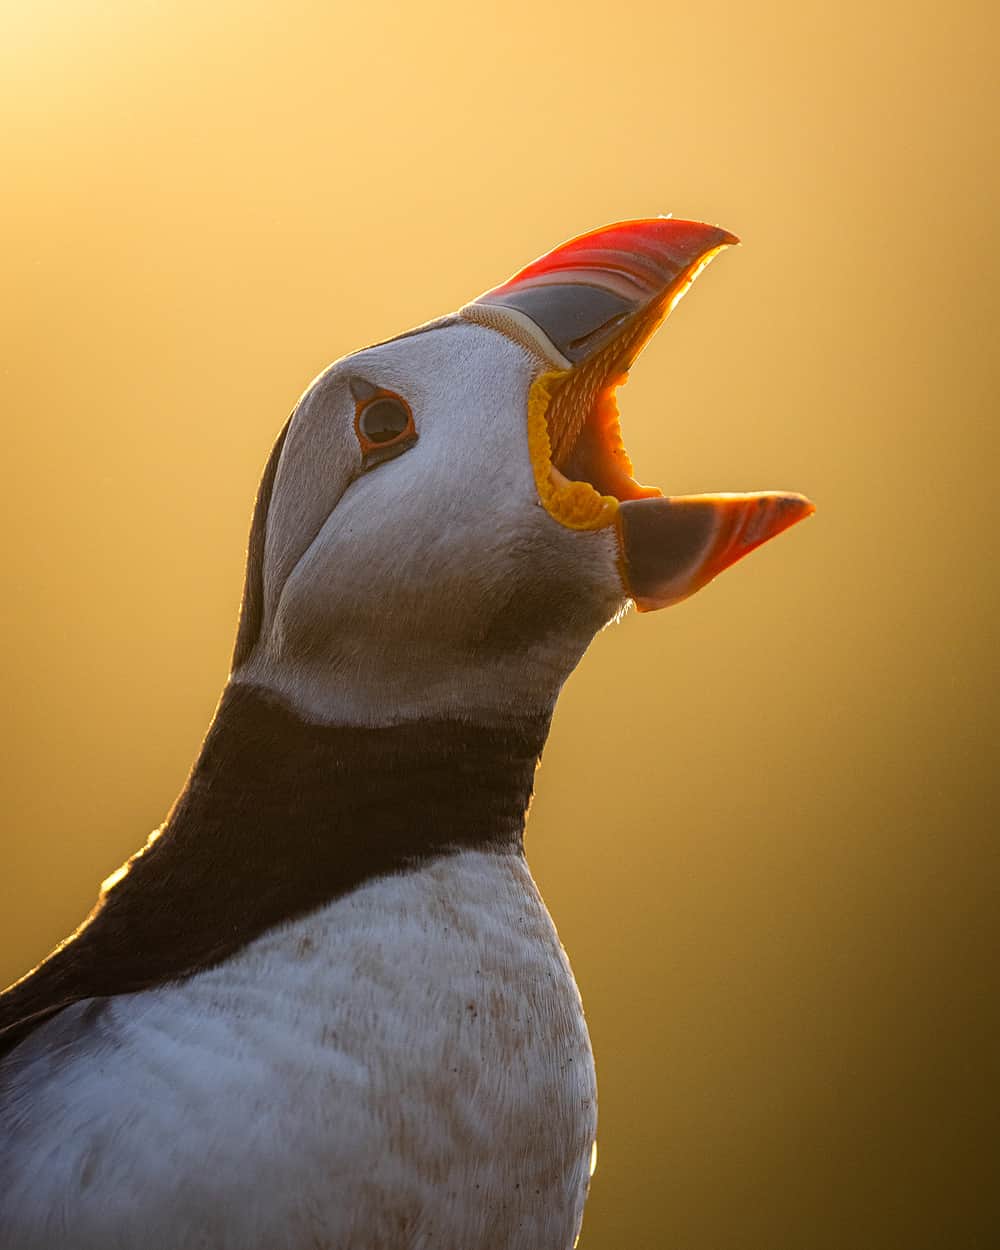 Canon UKのインスタグラム：「Puffin says 'aghhh’!  Do you have any favourite photography equipment or techniques for capturing wildlife photos? Let us know in the comments below 👇   📷 by @drewbphotography  Camera: EOS R5 Lens: RF 100-500mm F4.5-7.1 L IS USM  Shutter Speed: 1/1600, Aperture: f/6.3, ISO 1250  #canonuk #mycanon #canon_photography #liveforthestory」